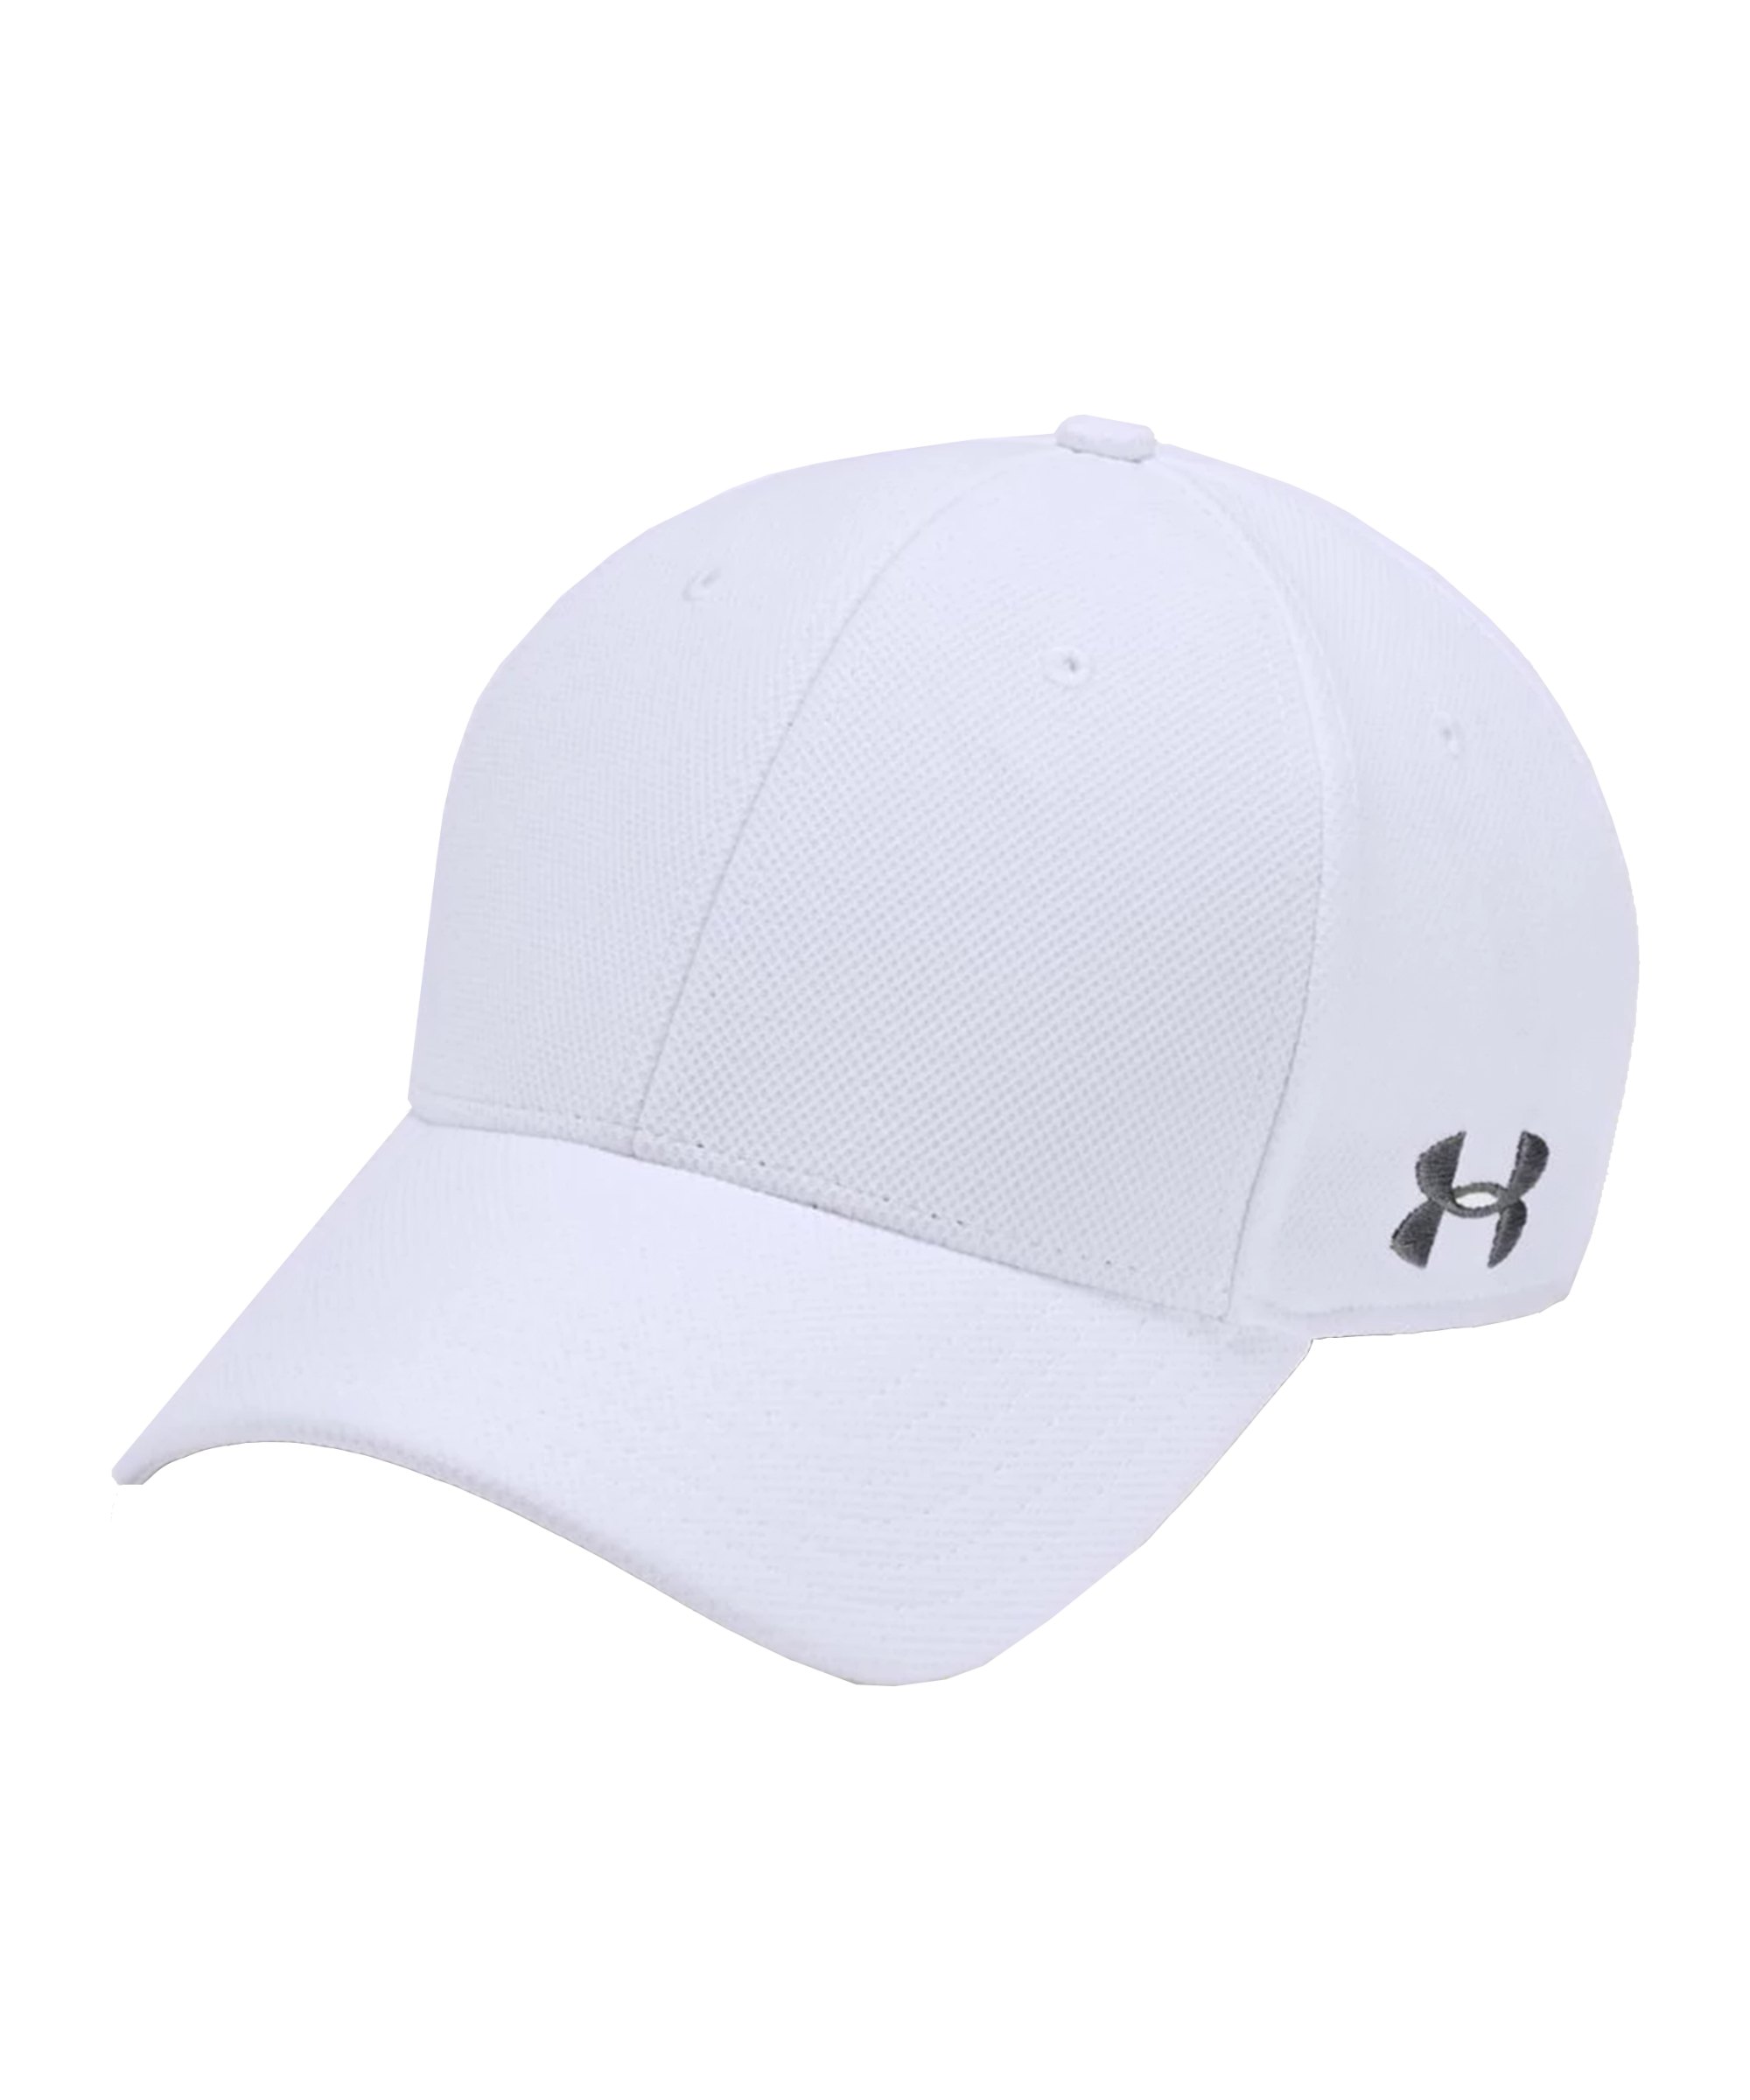 Under Armour Blank Blitzing Kappe Training F100 - weiss